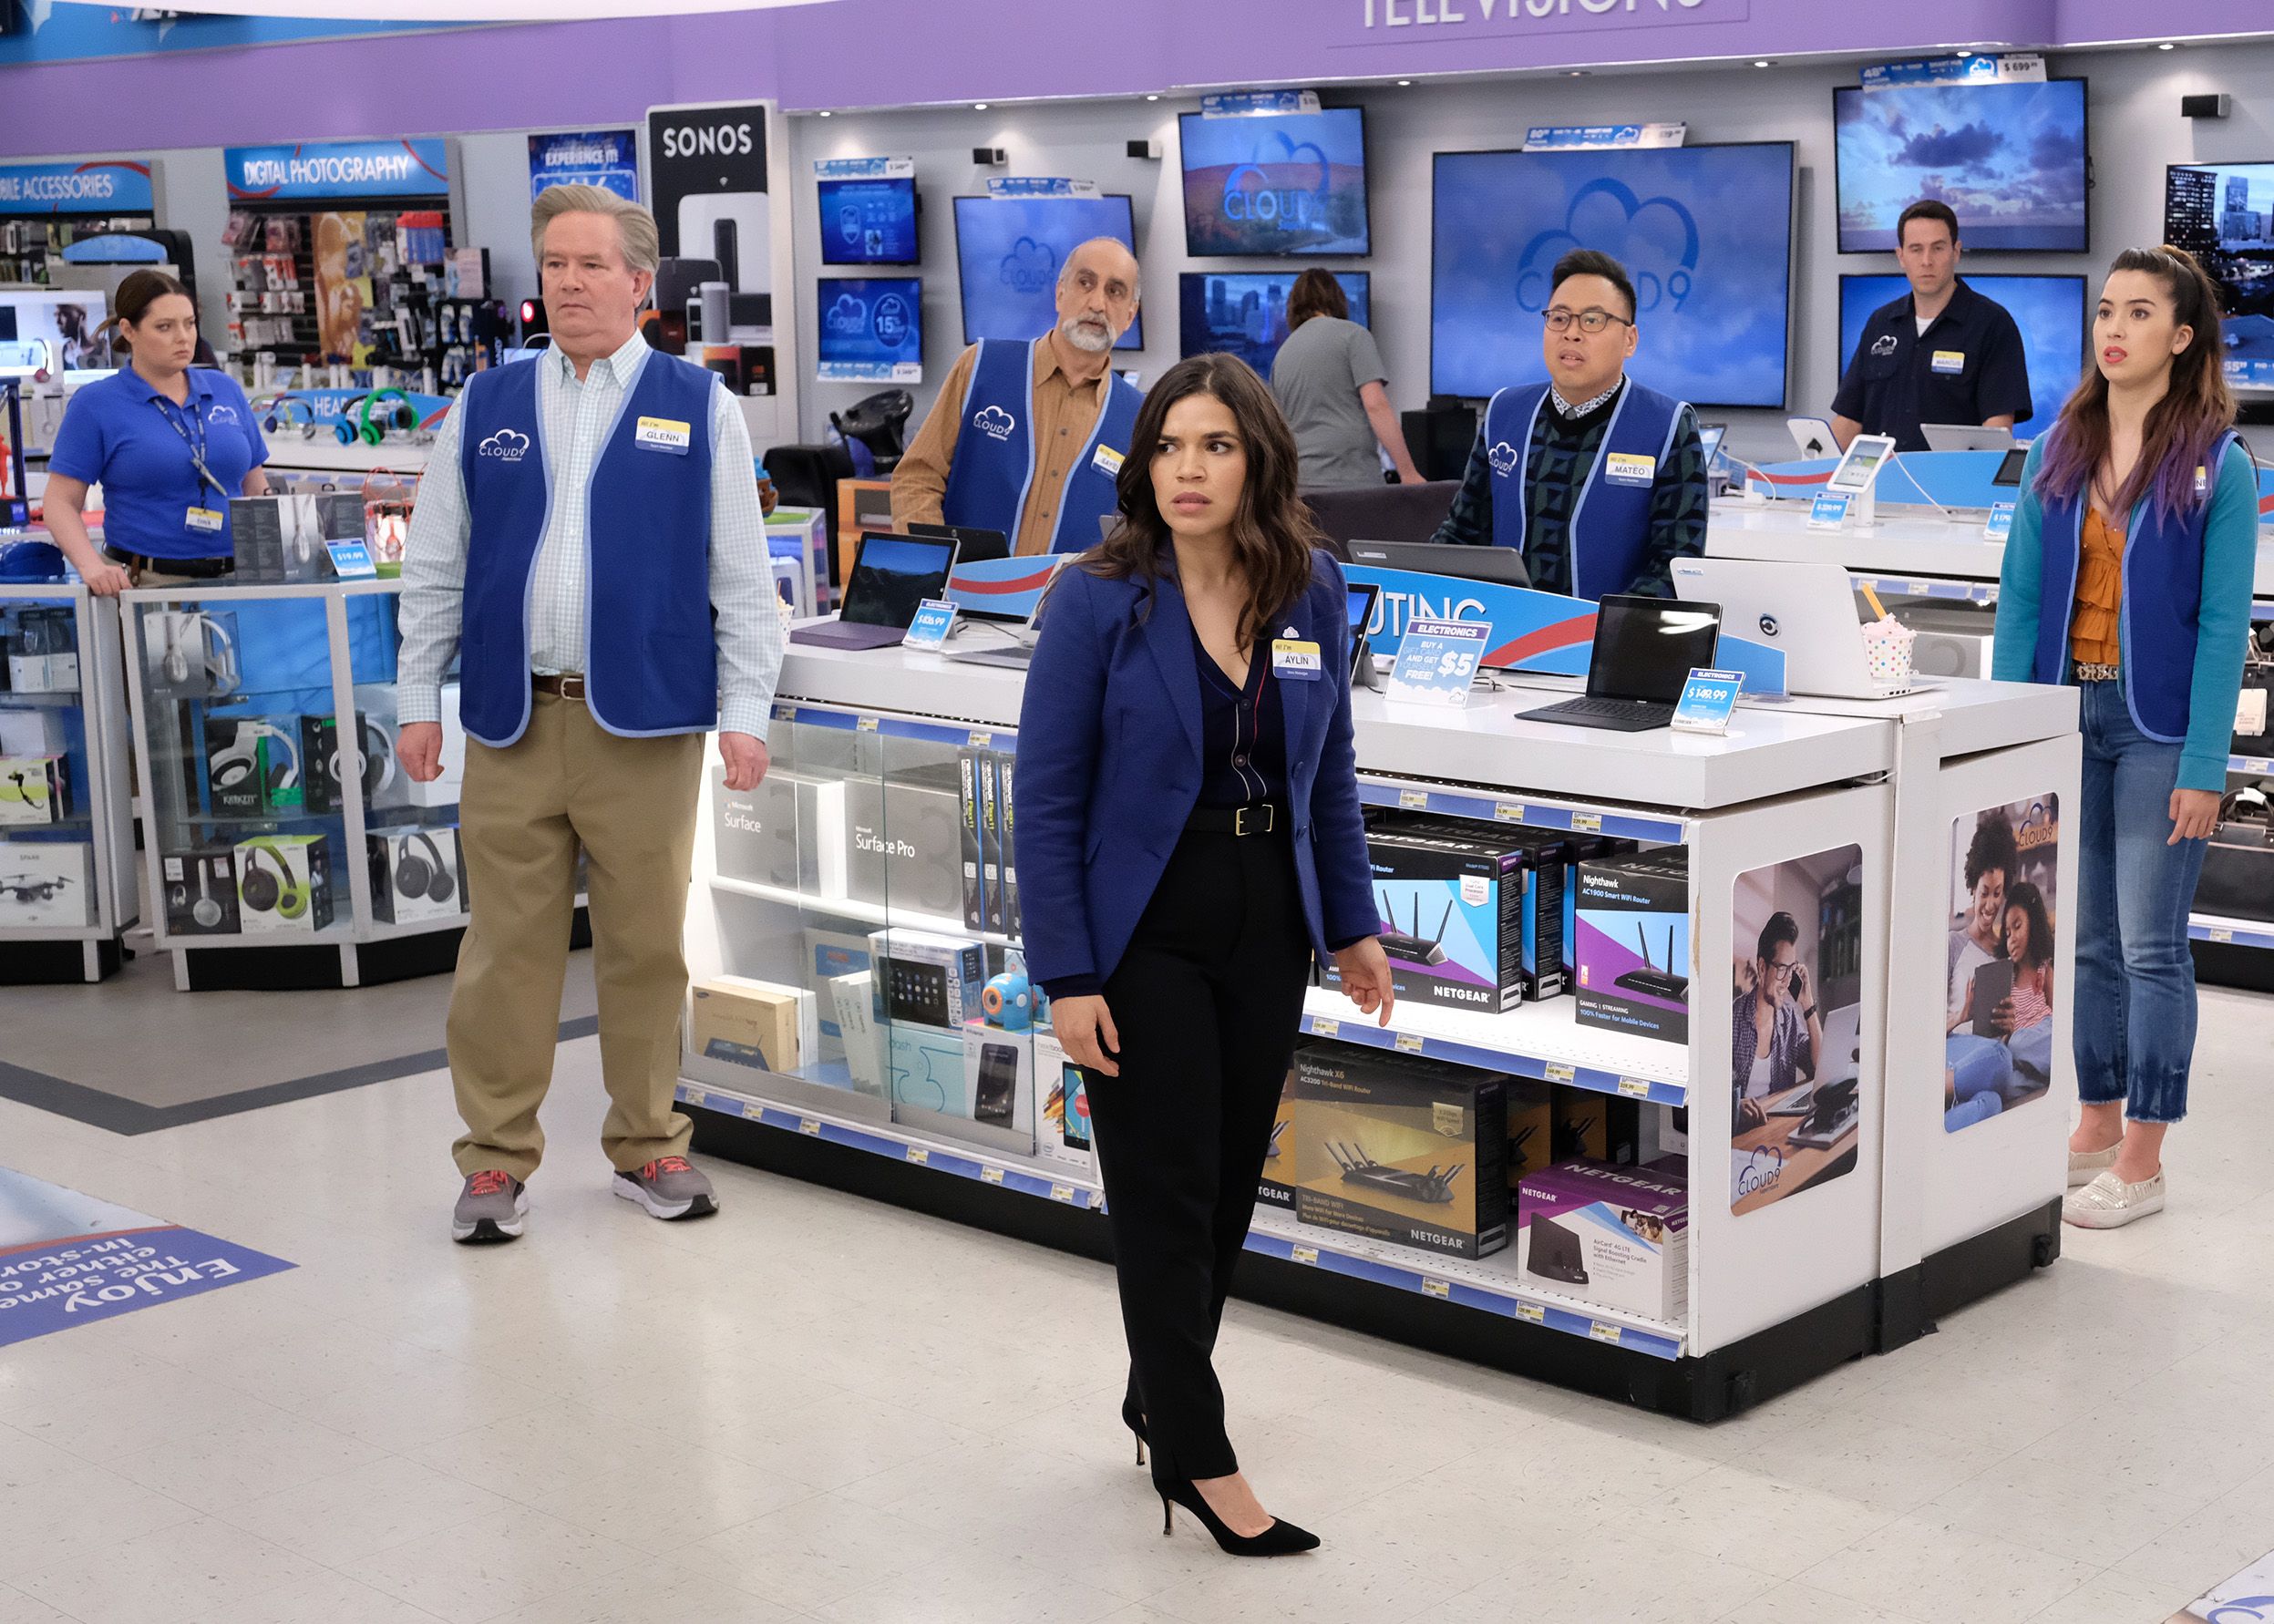 The Cast of Superstore on set in the electronic department